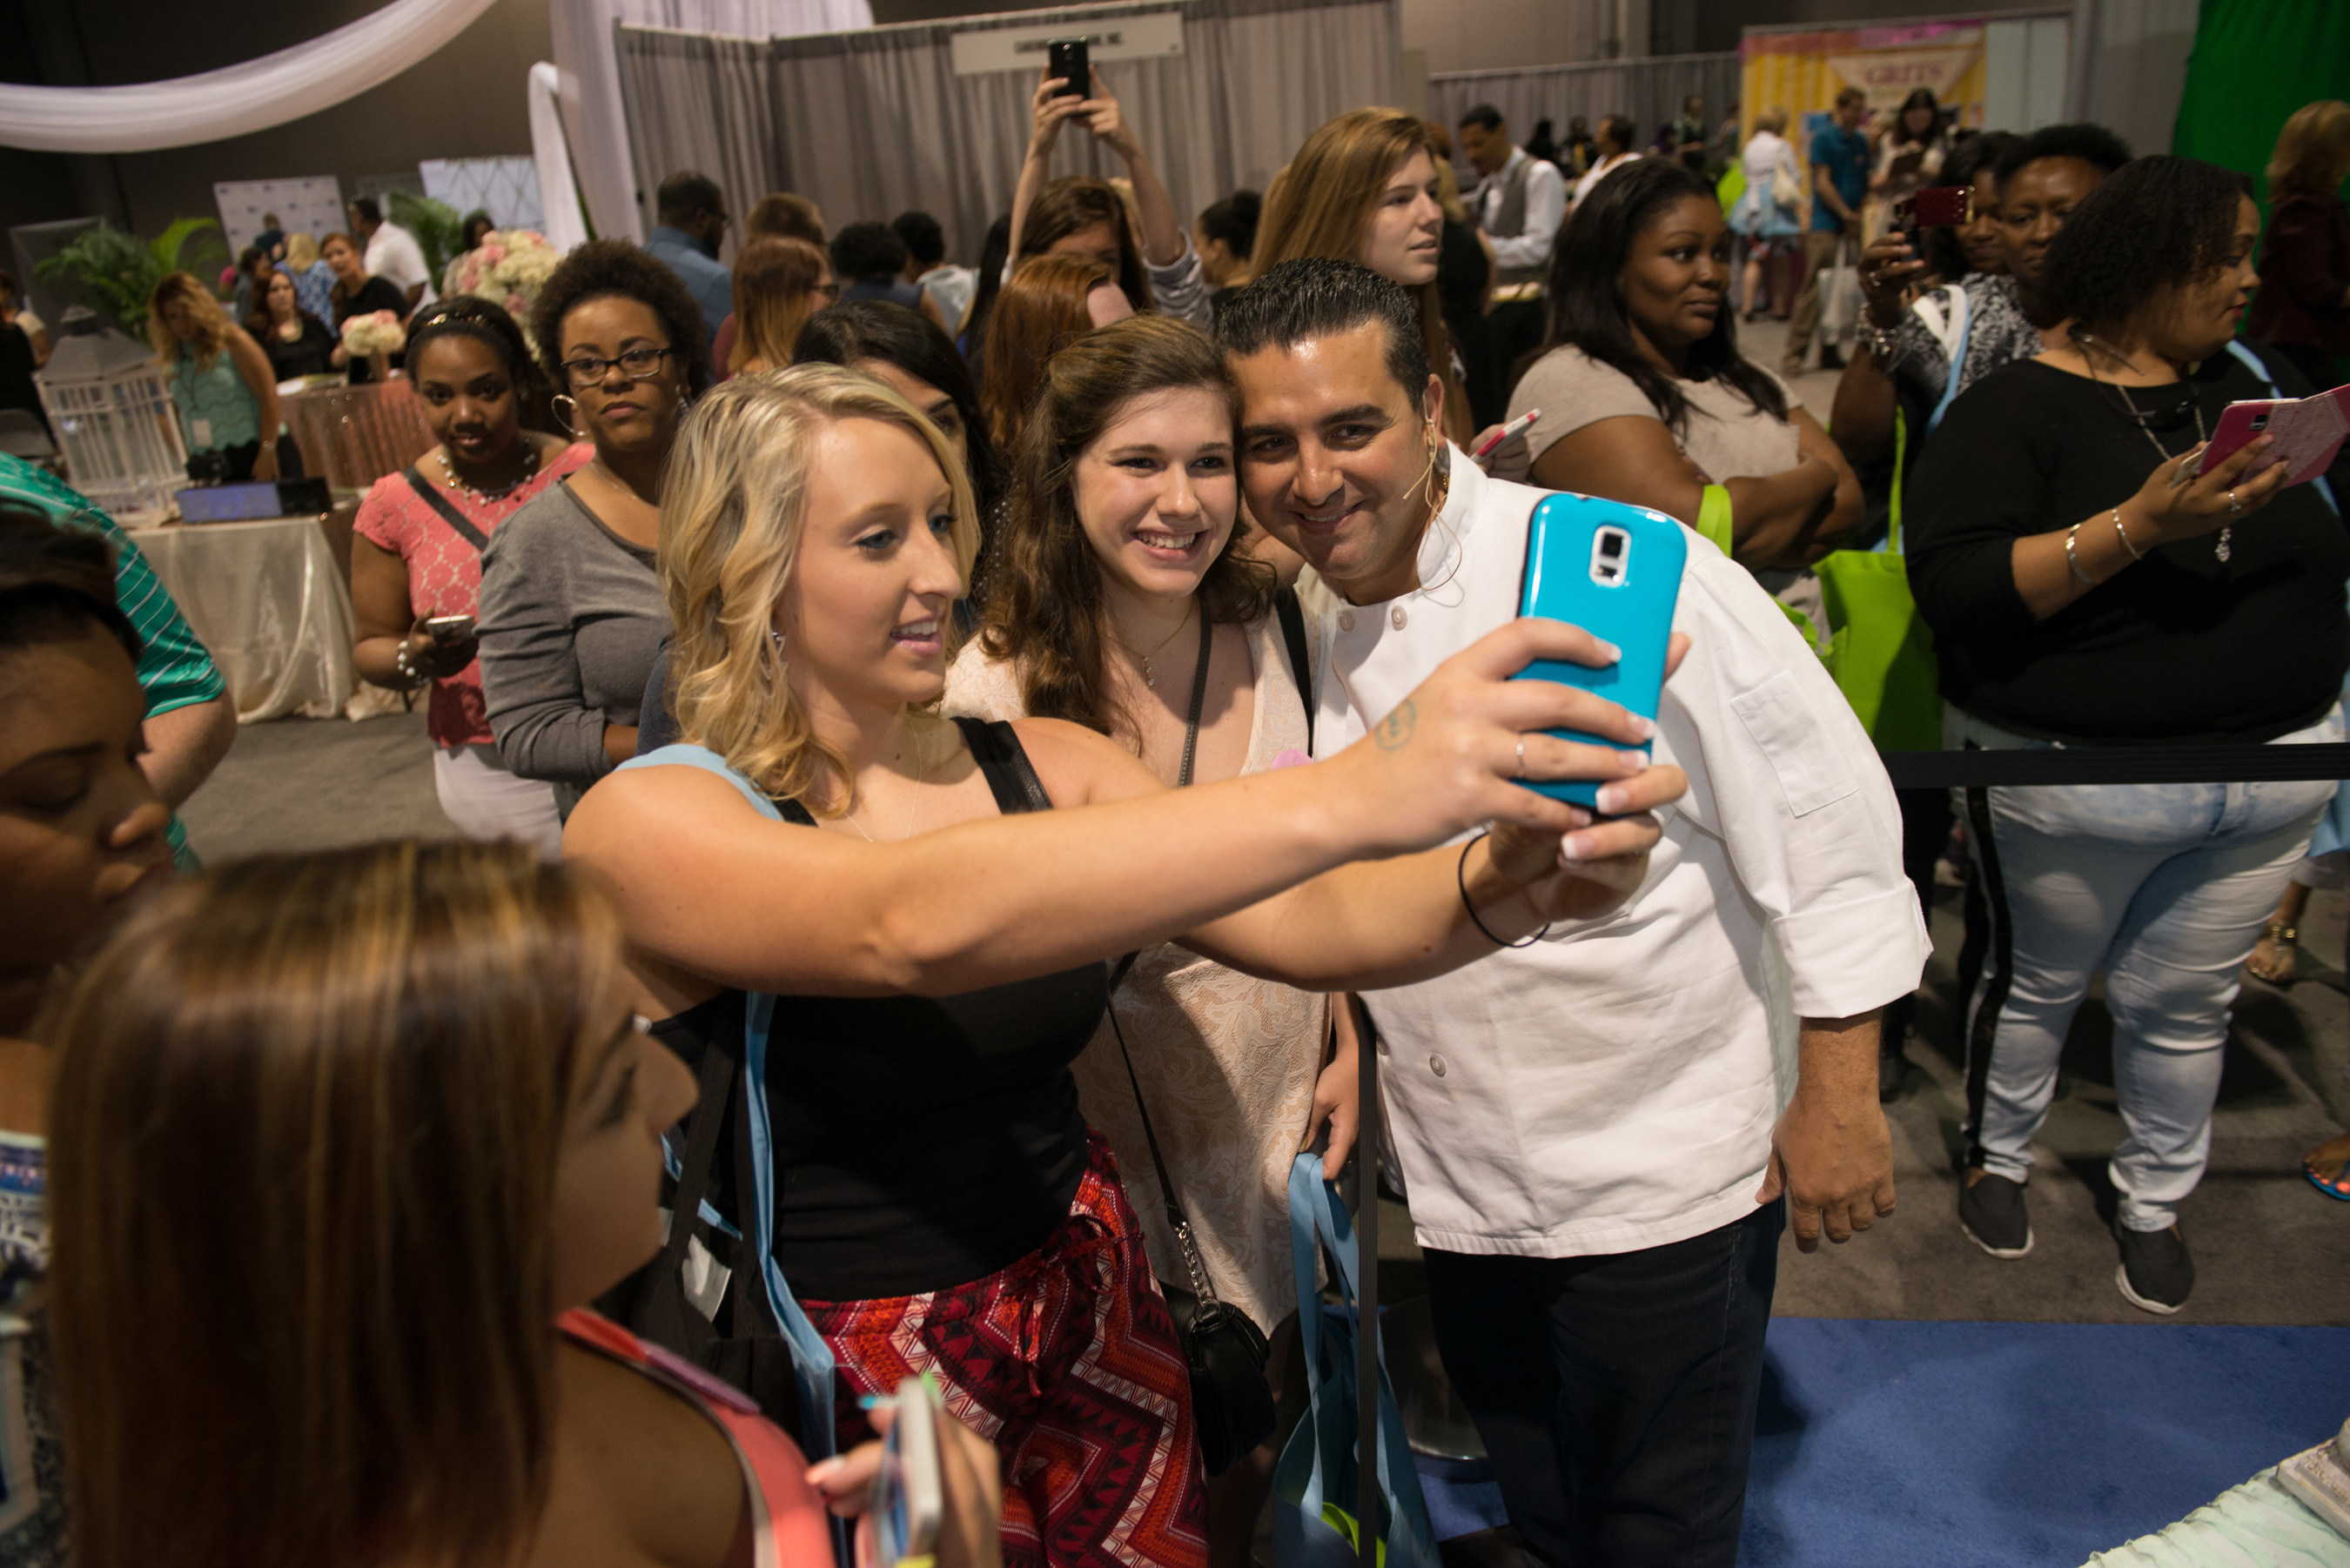 "Cakeboss" Buddy Valastro in the Crowd at Your Wedding Experience Atlanta